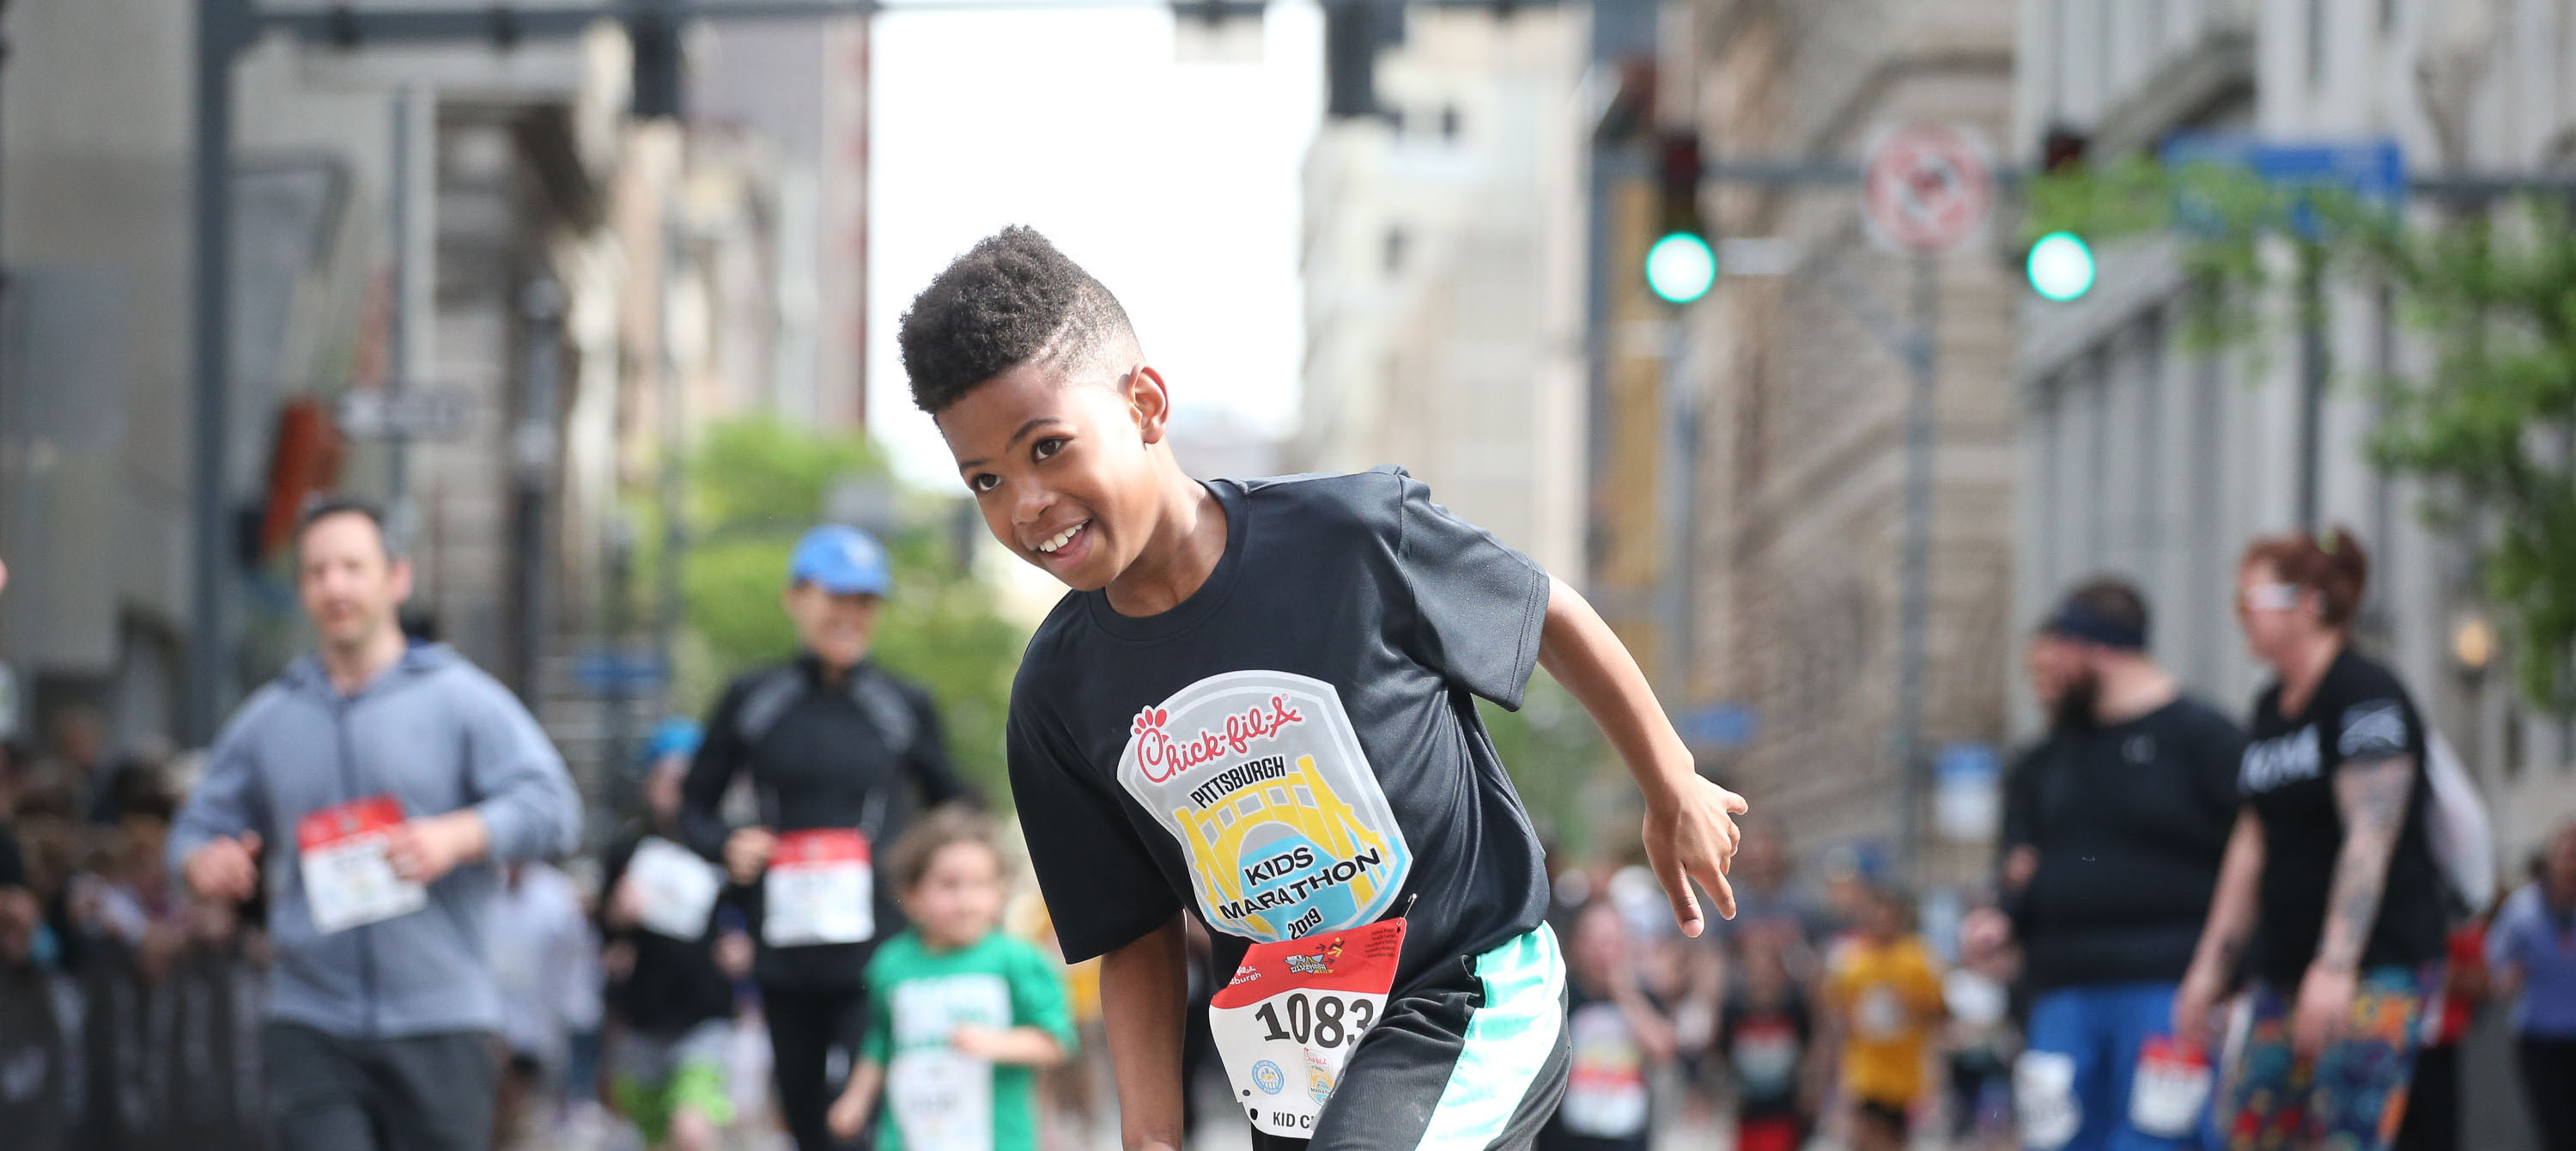 Young boy running in the Chick-fil-A Pittsburgh Kids Marathon